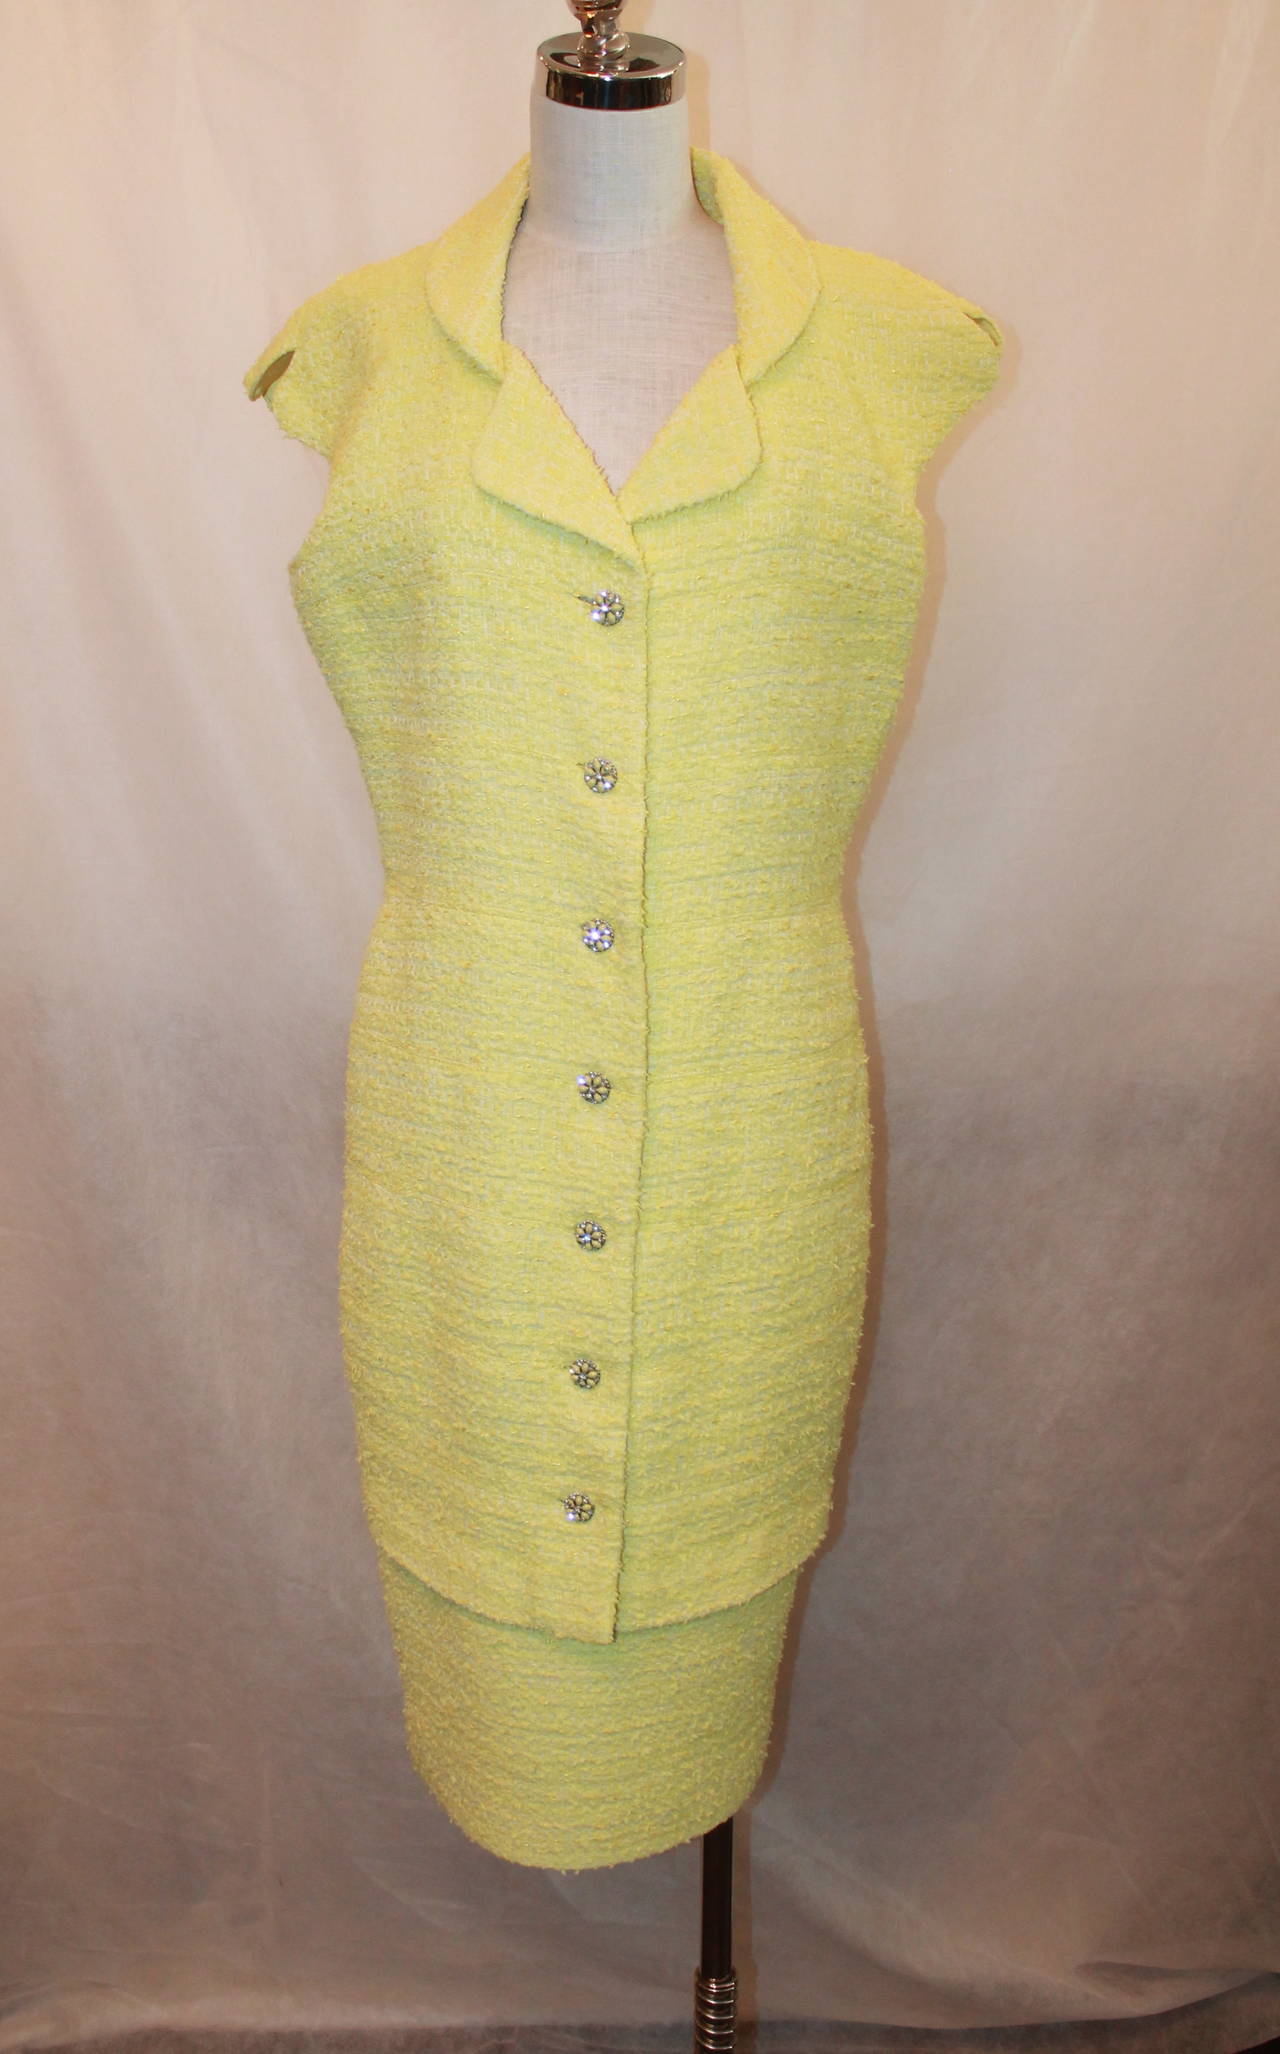 Chanel Yellow Tweed Sleeveless Coat Dress with Snake Belt - 44. This dress is in excellent condition and has buttons with rhinestones & yellow stones. There are 7 in the front and another 3 in the back towards the bottom. The belt is a yellow